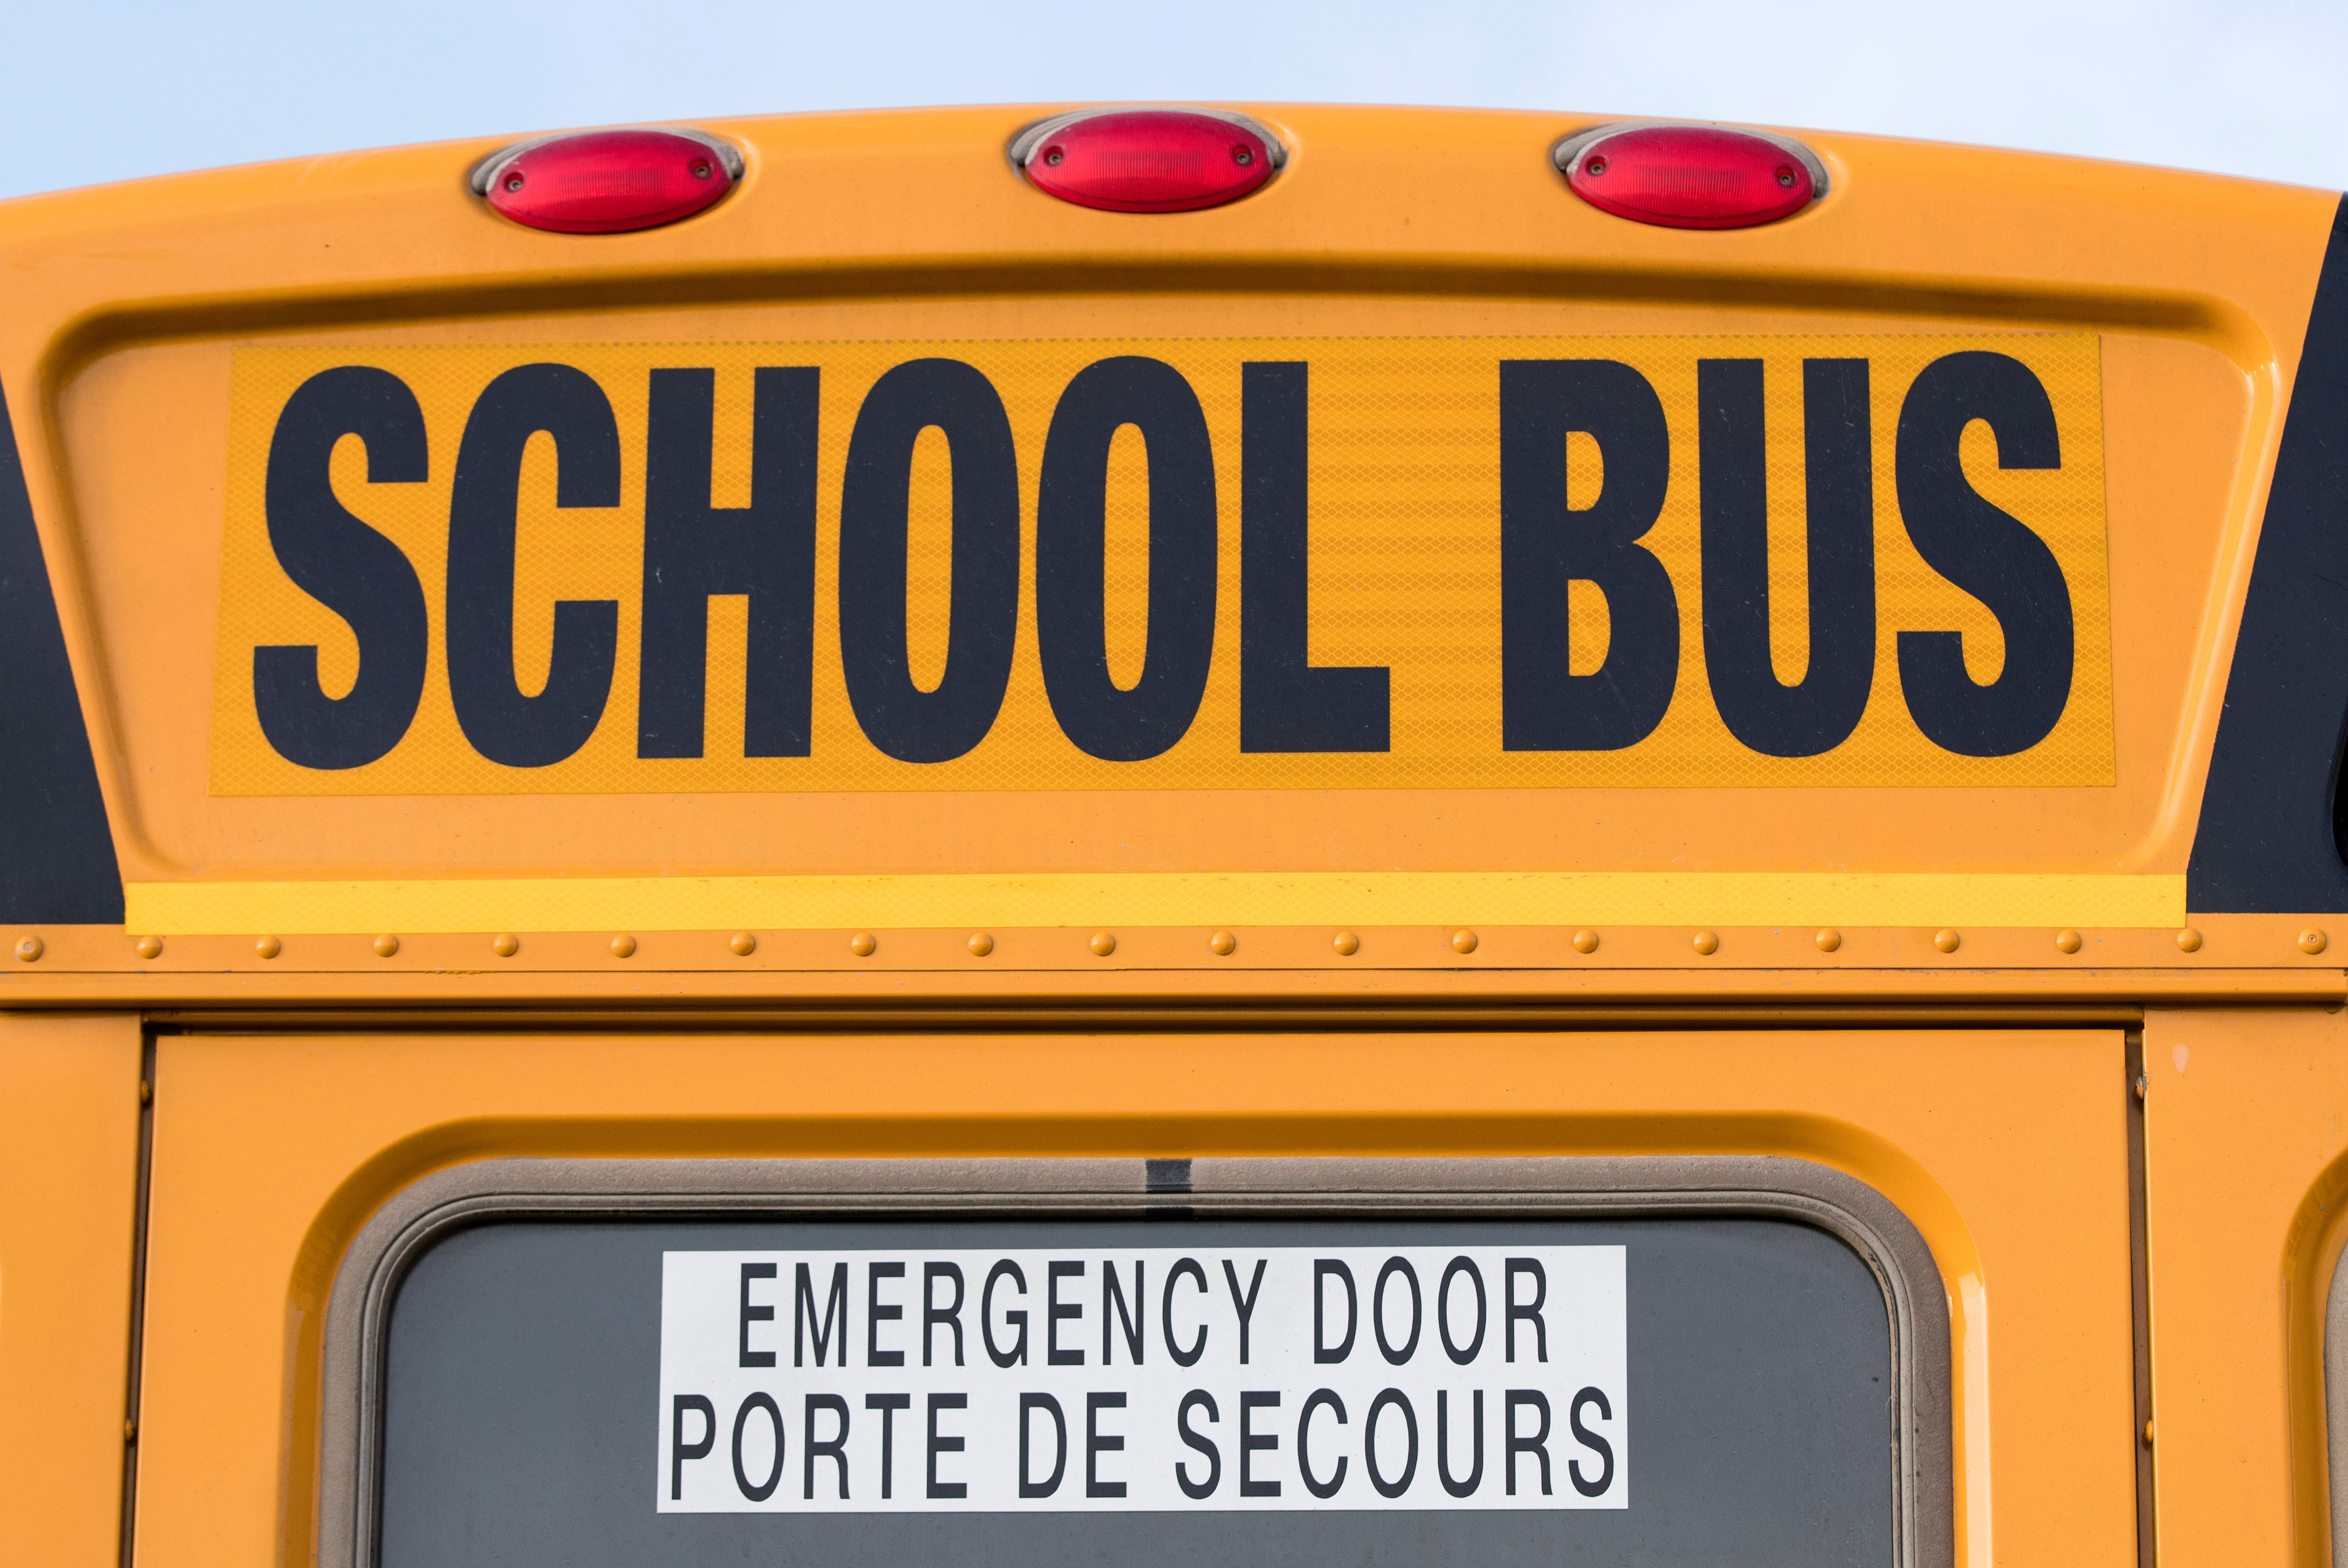 Nearly 40 school bus routes in the Peterborough area will be cancelled Monday due to a driver shortage.